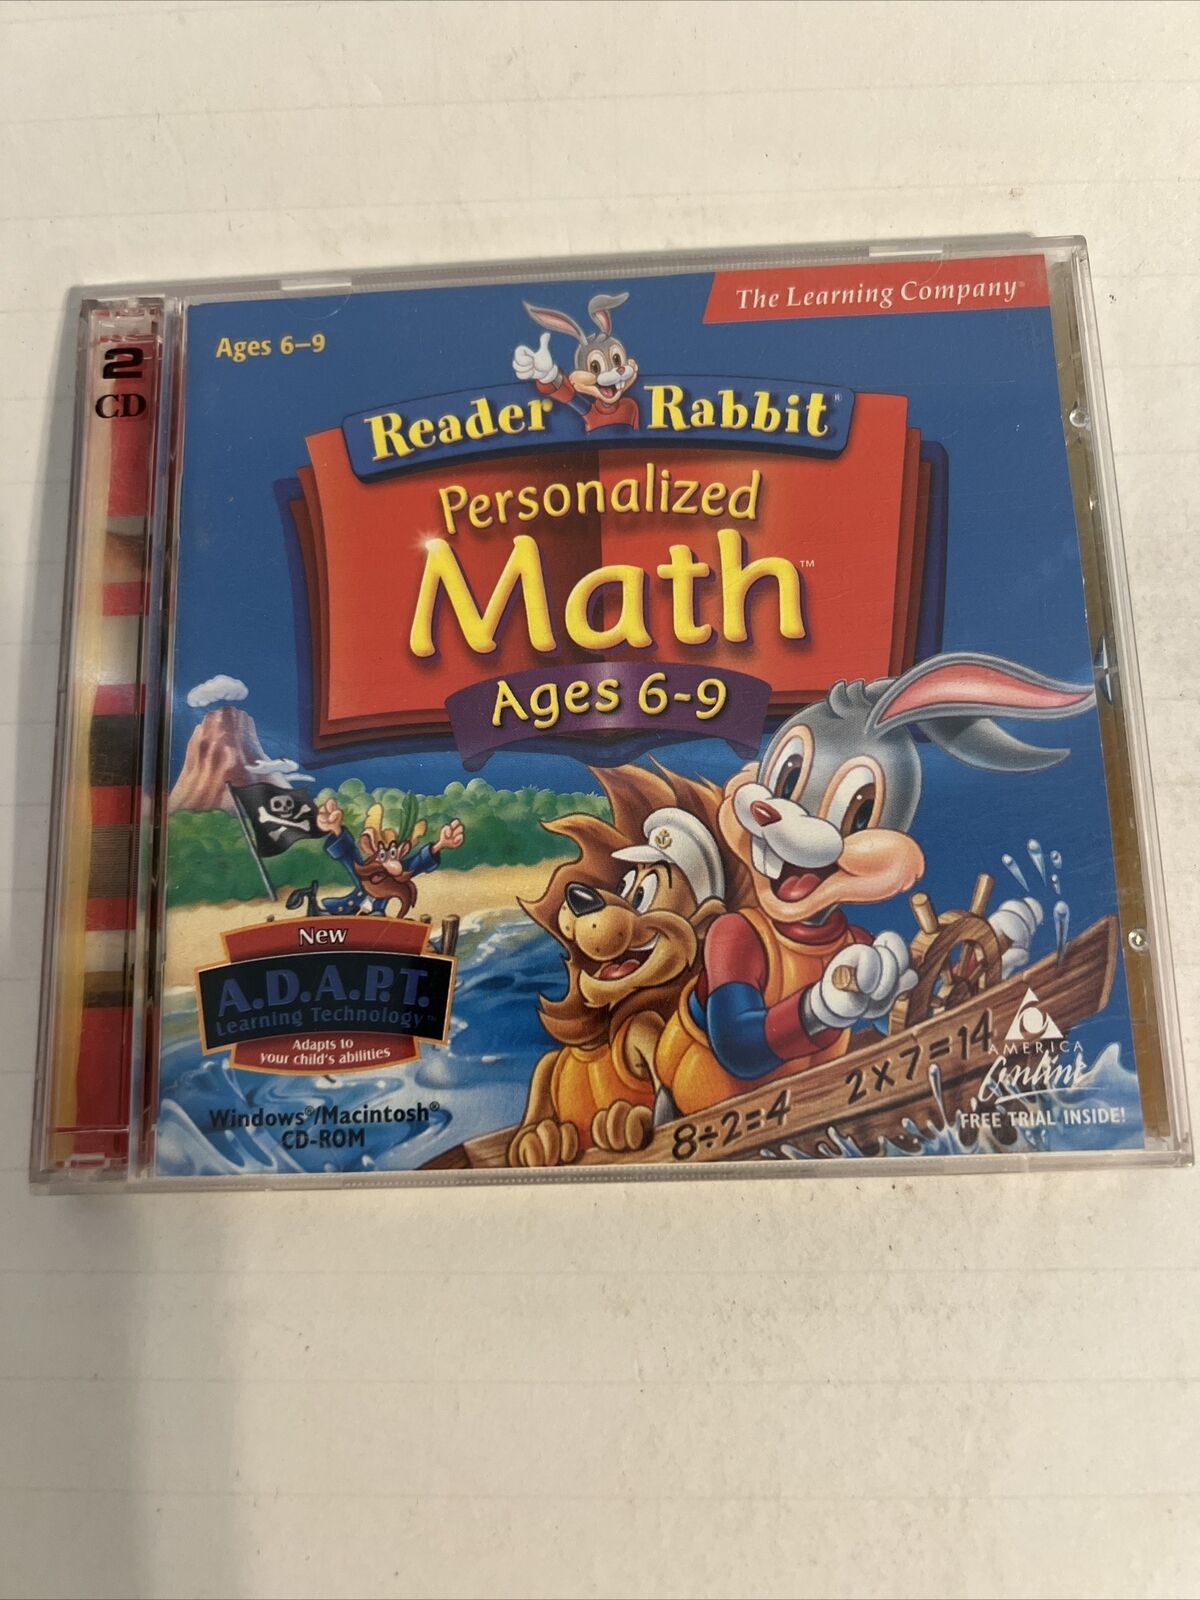 The Learning Company Reader Rabbit Personalized Math Ages 4 - 6